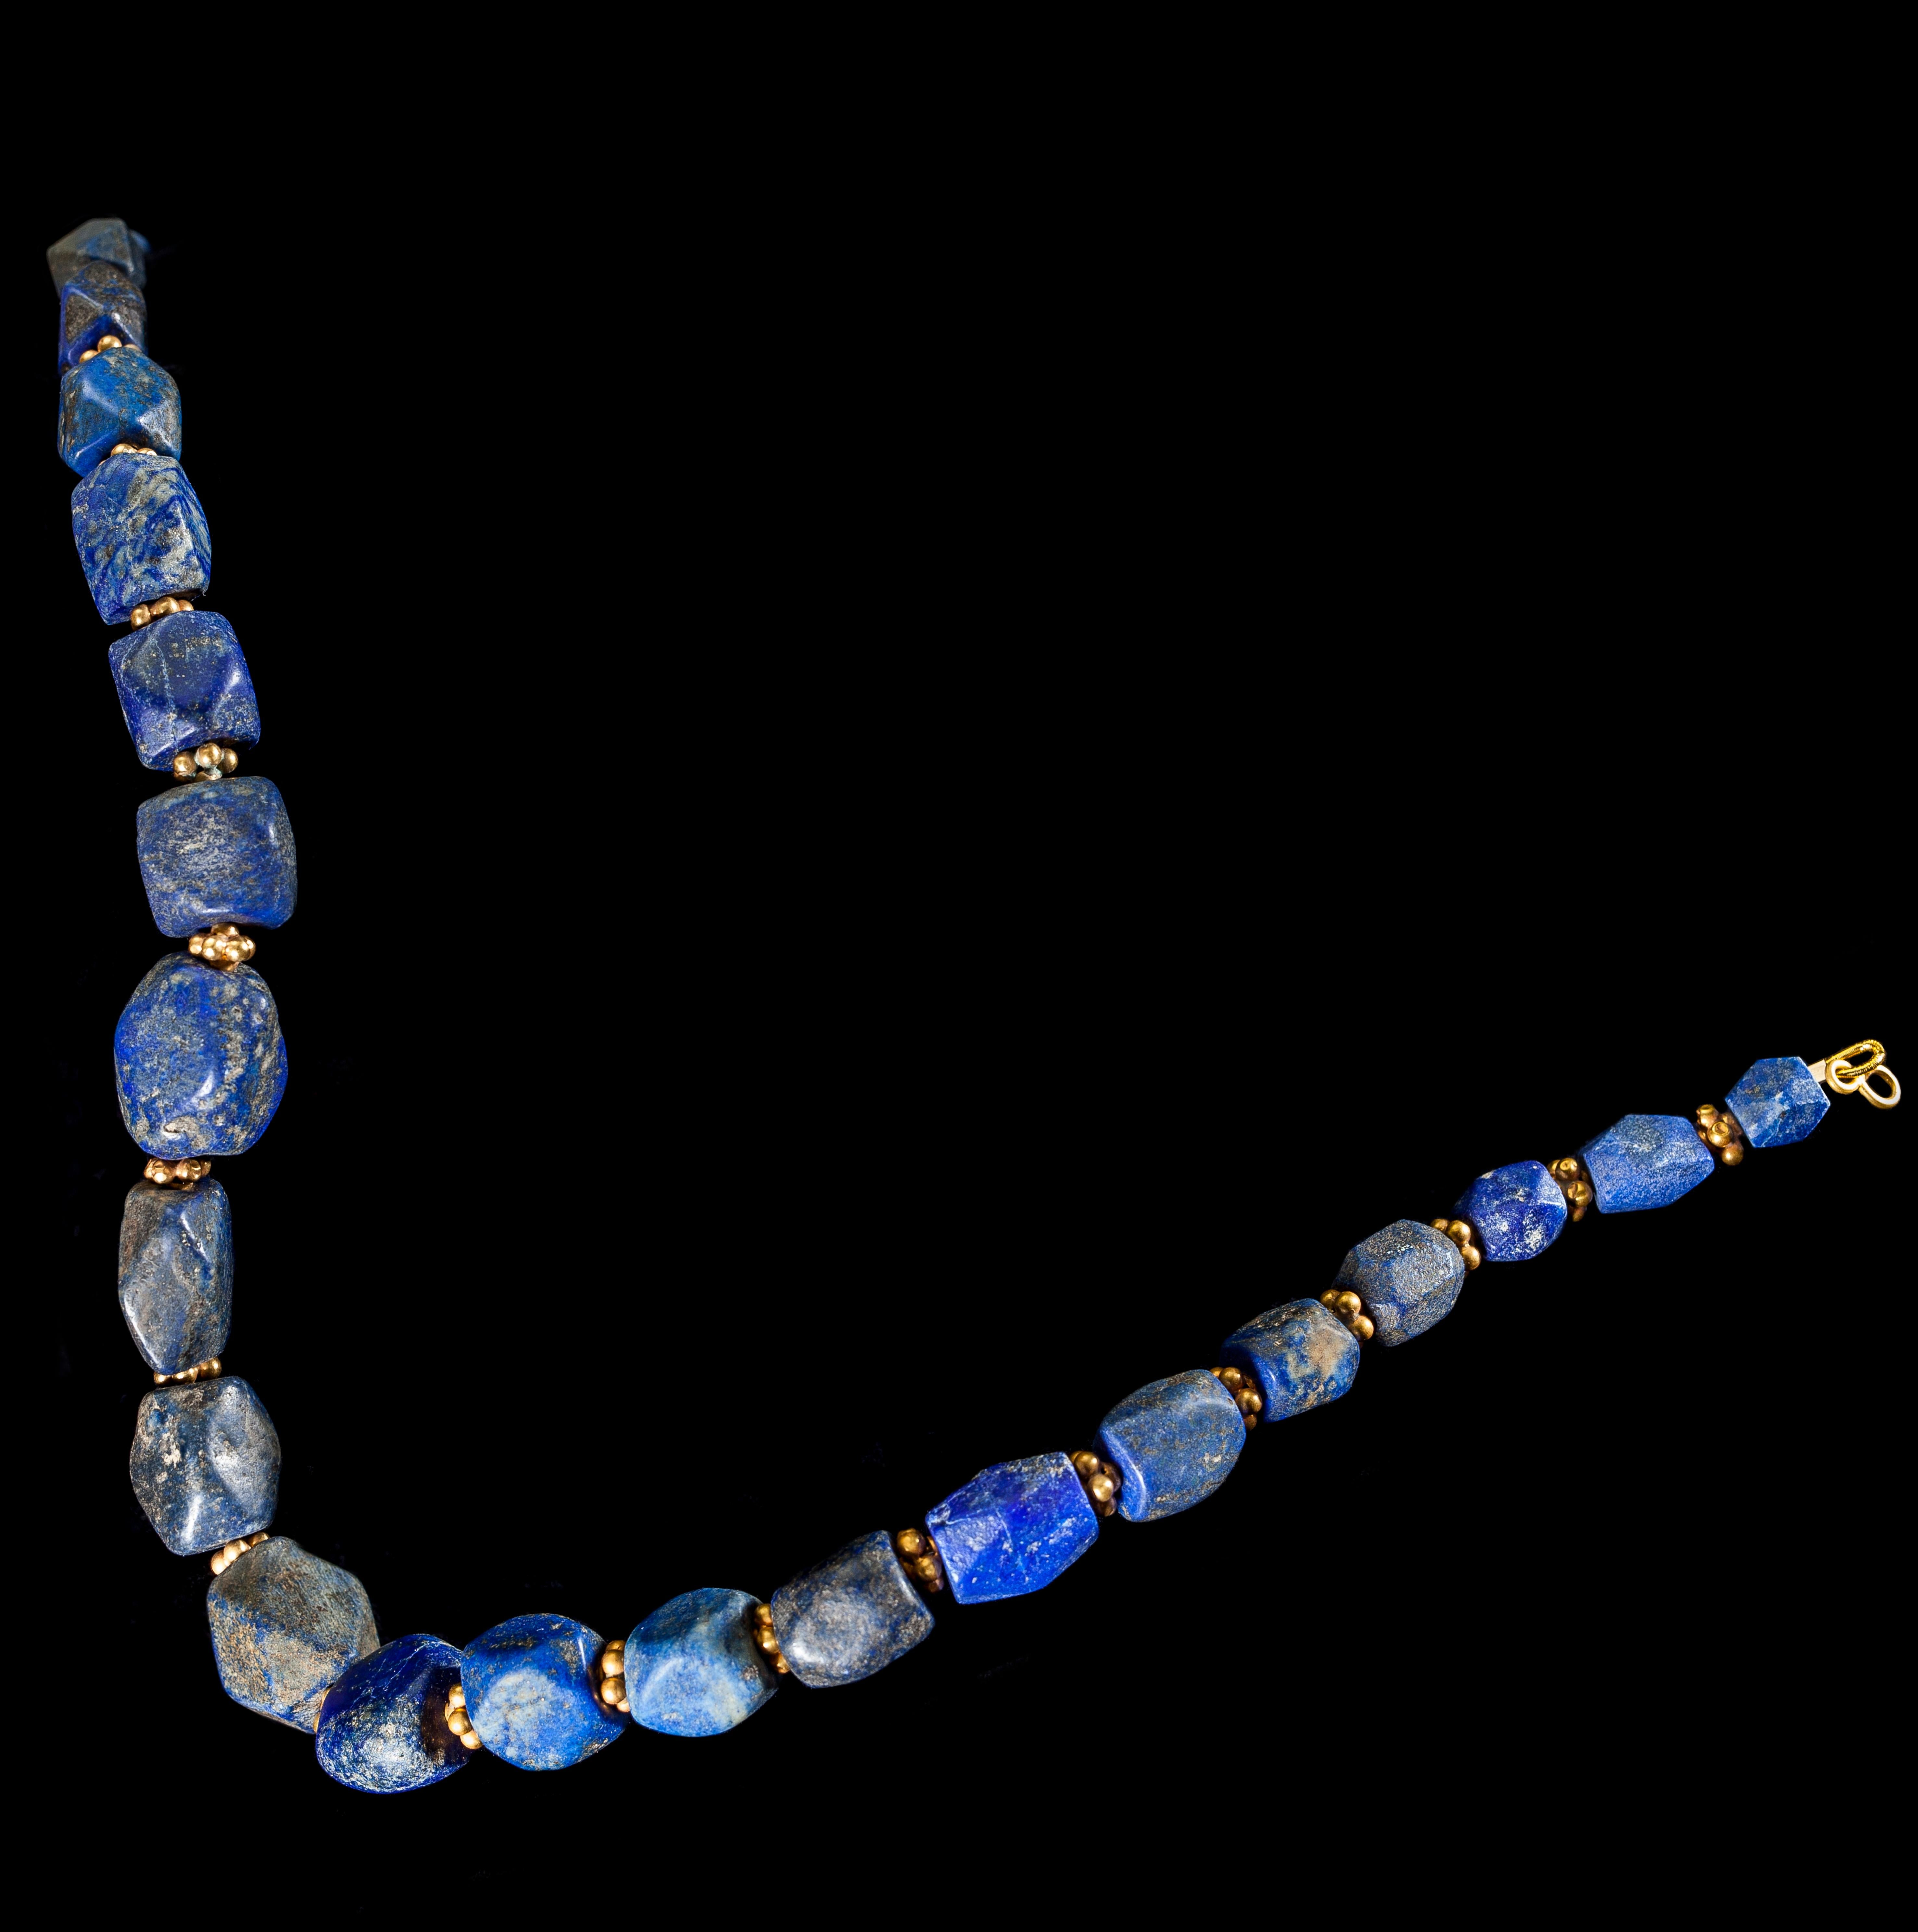 Bactrian culture spread across a wide area of modern-day Afghanistan and Uzbekistan and reached its zenith between 2100 and 1700 B.C. It produced many unique and distinctive objects and jewellery. This necklace has striking blue Lapis Lazuli stone